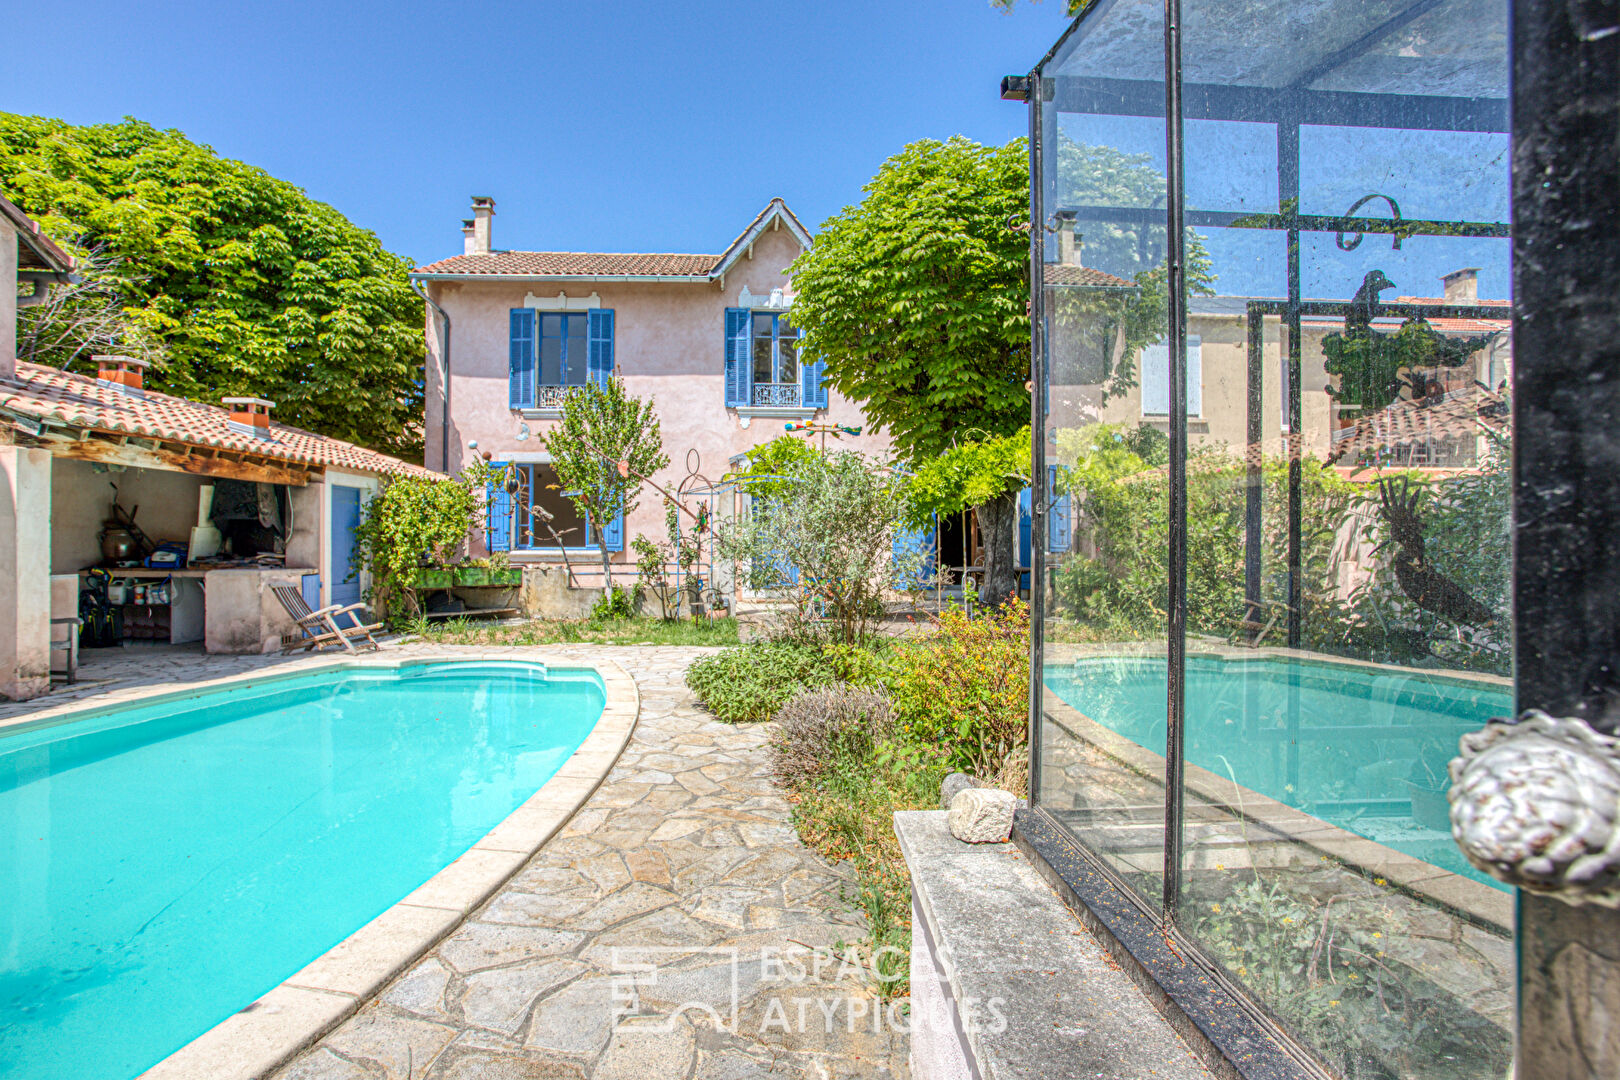 1930s townhouse with garden and swimming pool